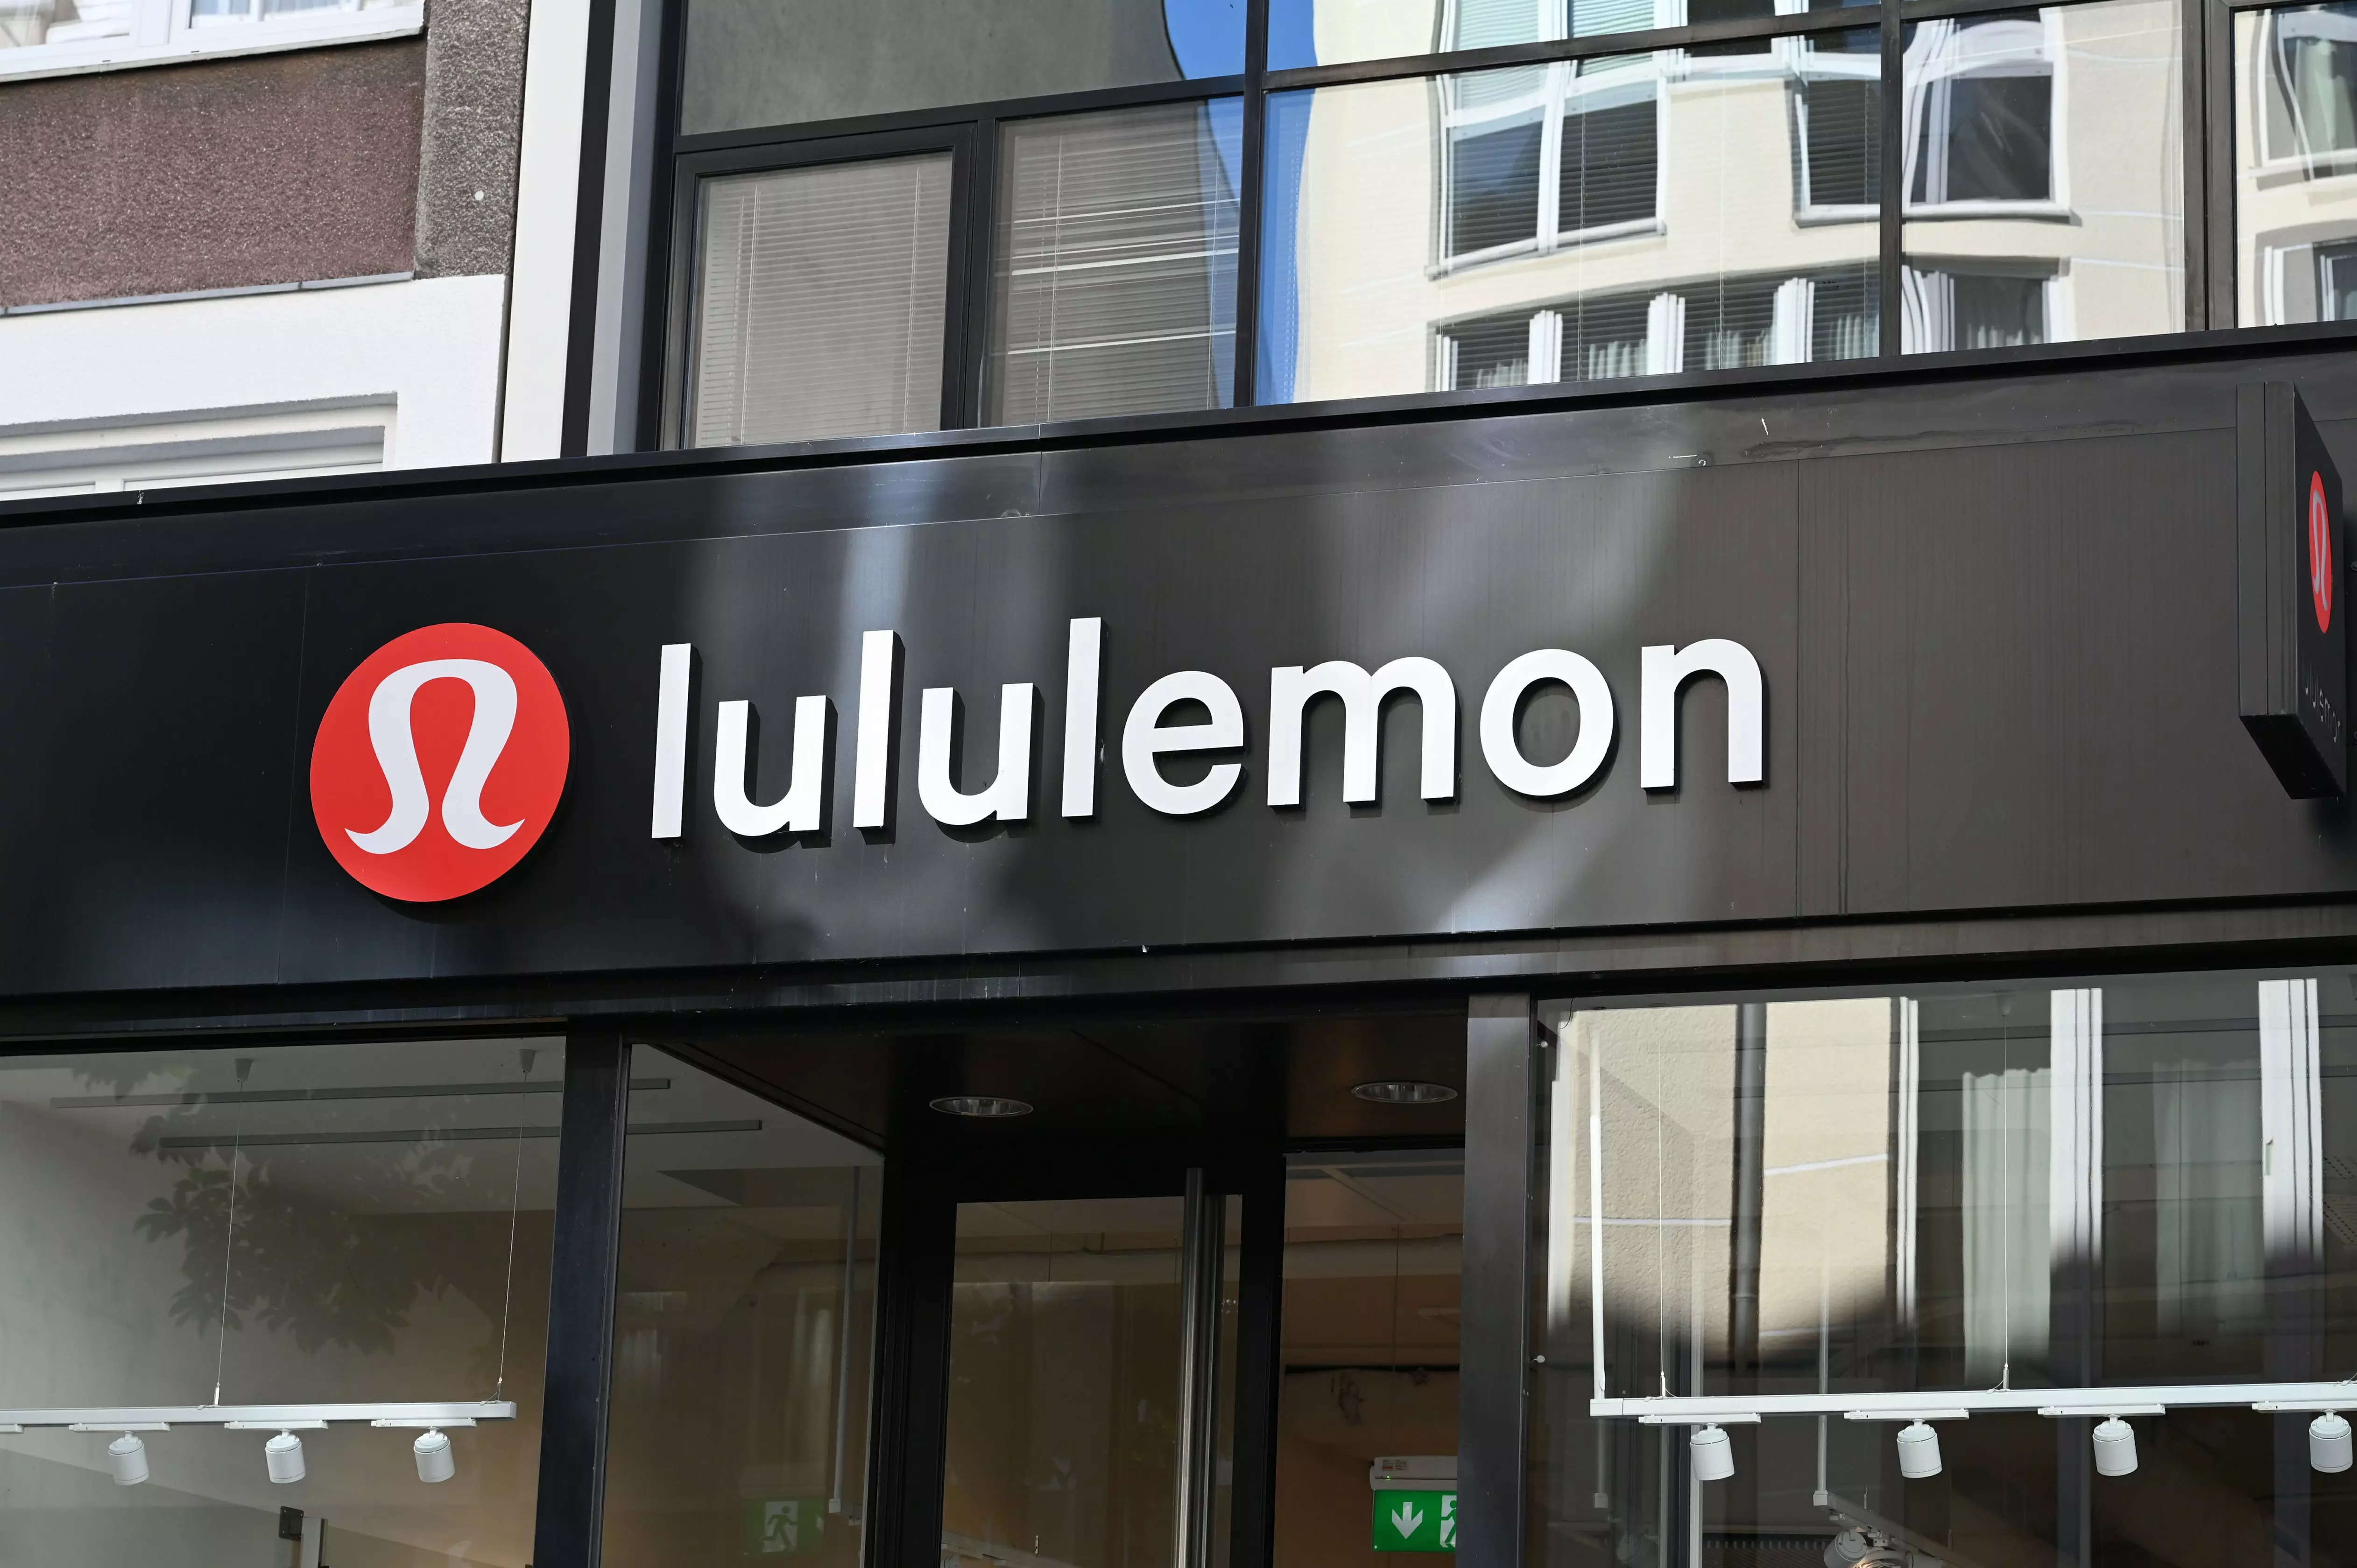 Lululemon hits back at founder's anti-DEI comments: They 'do not